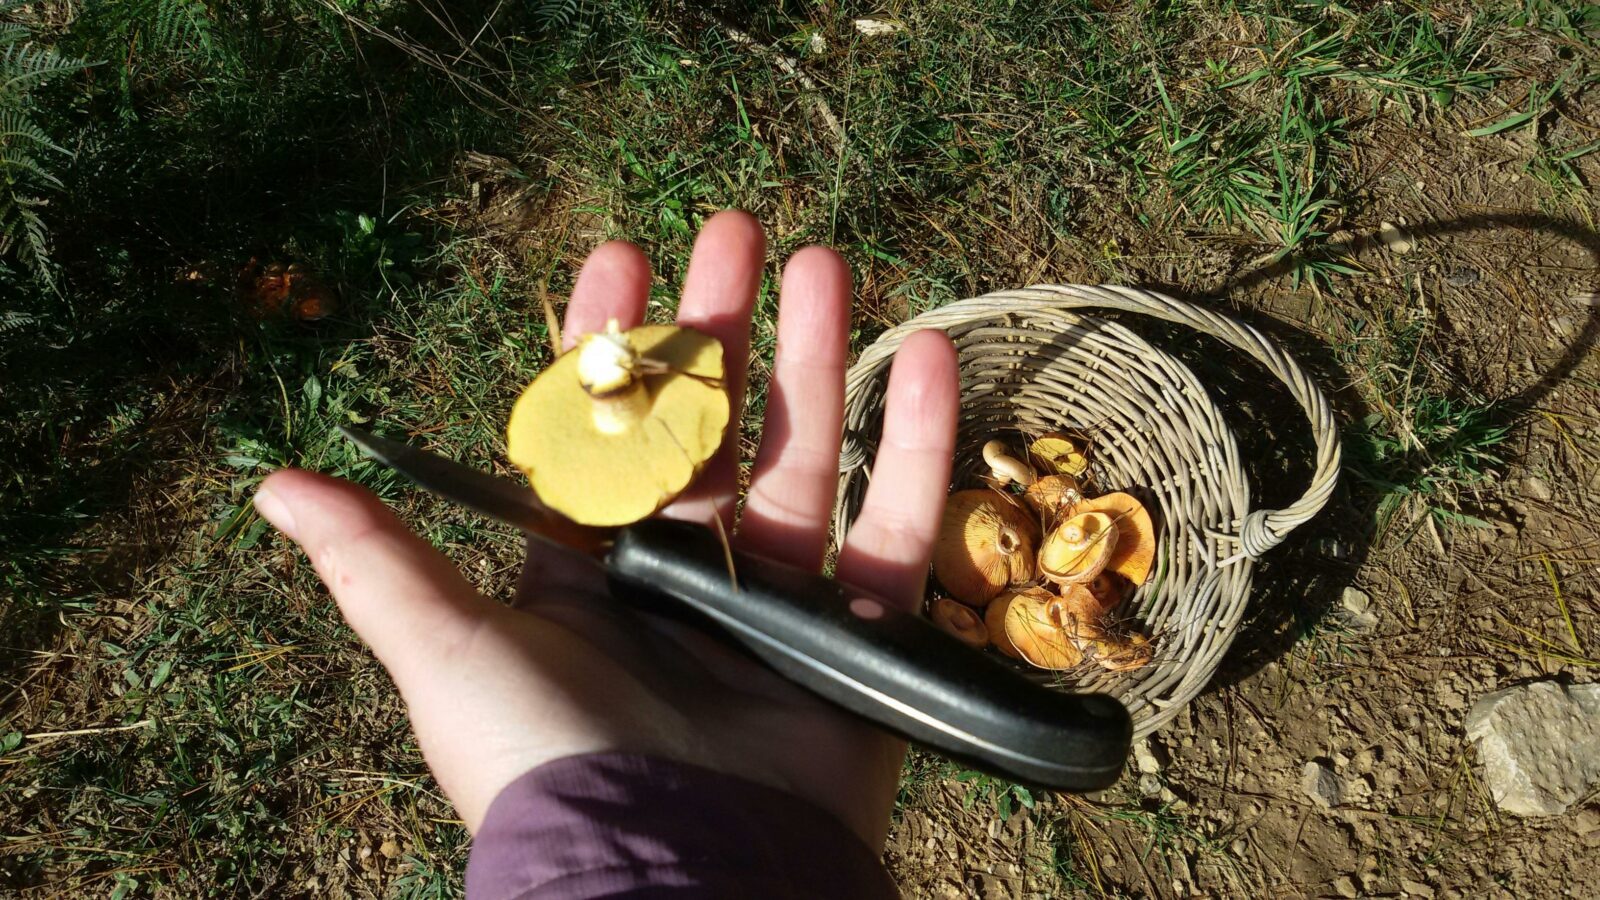 A hand holding a yellow mushrom and a knife over a basket of wild mushrooms